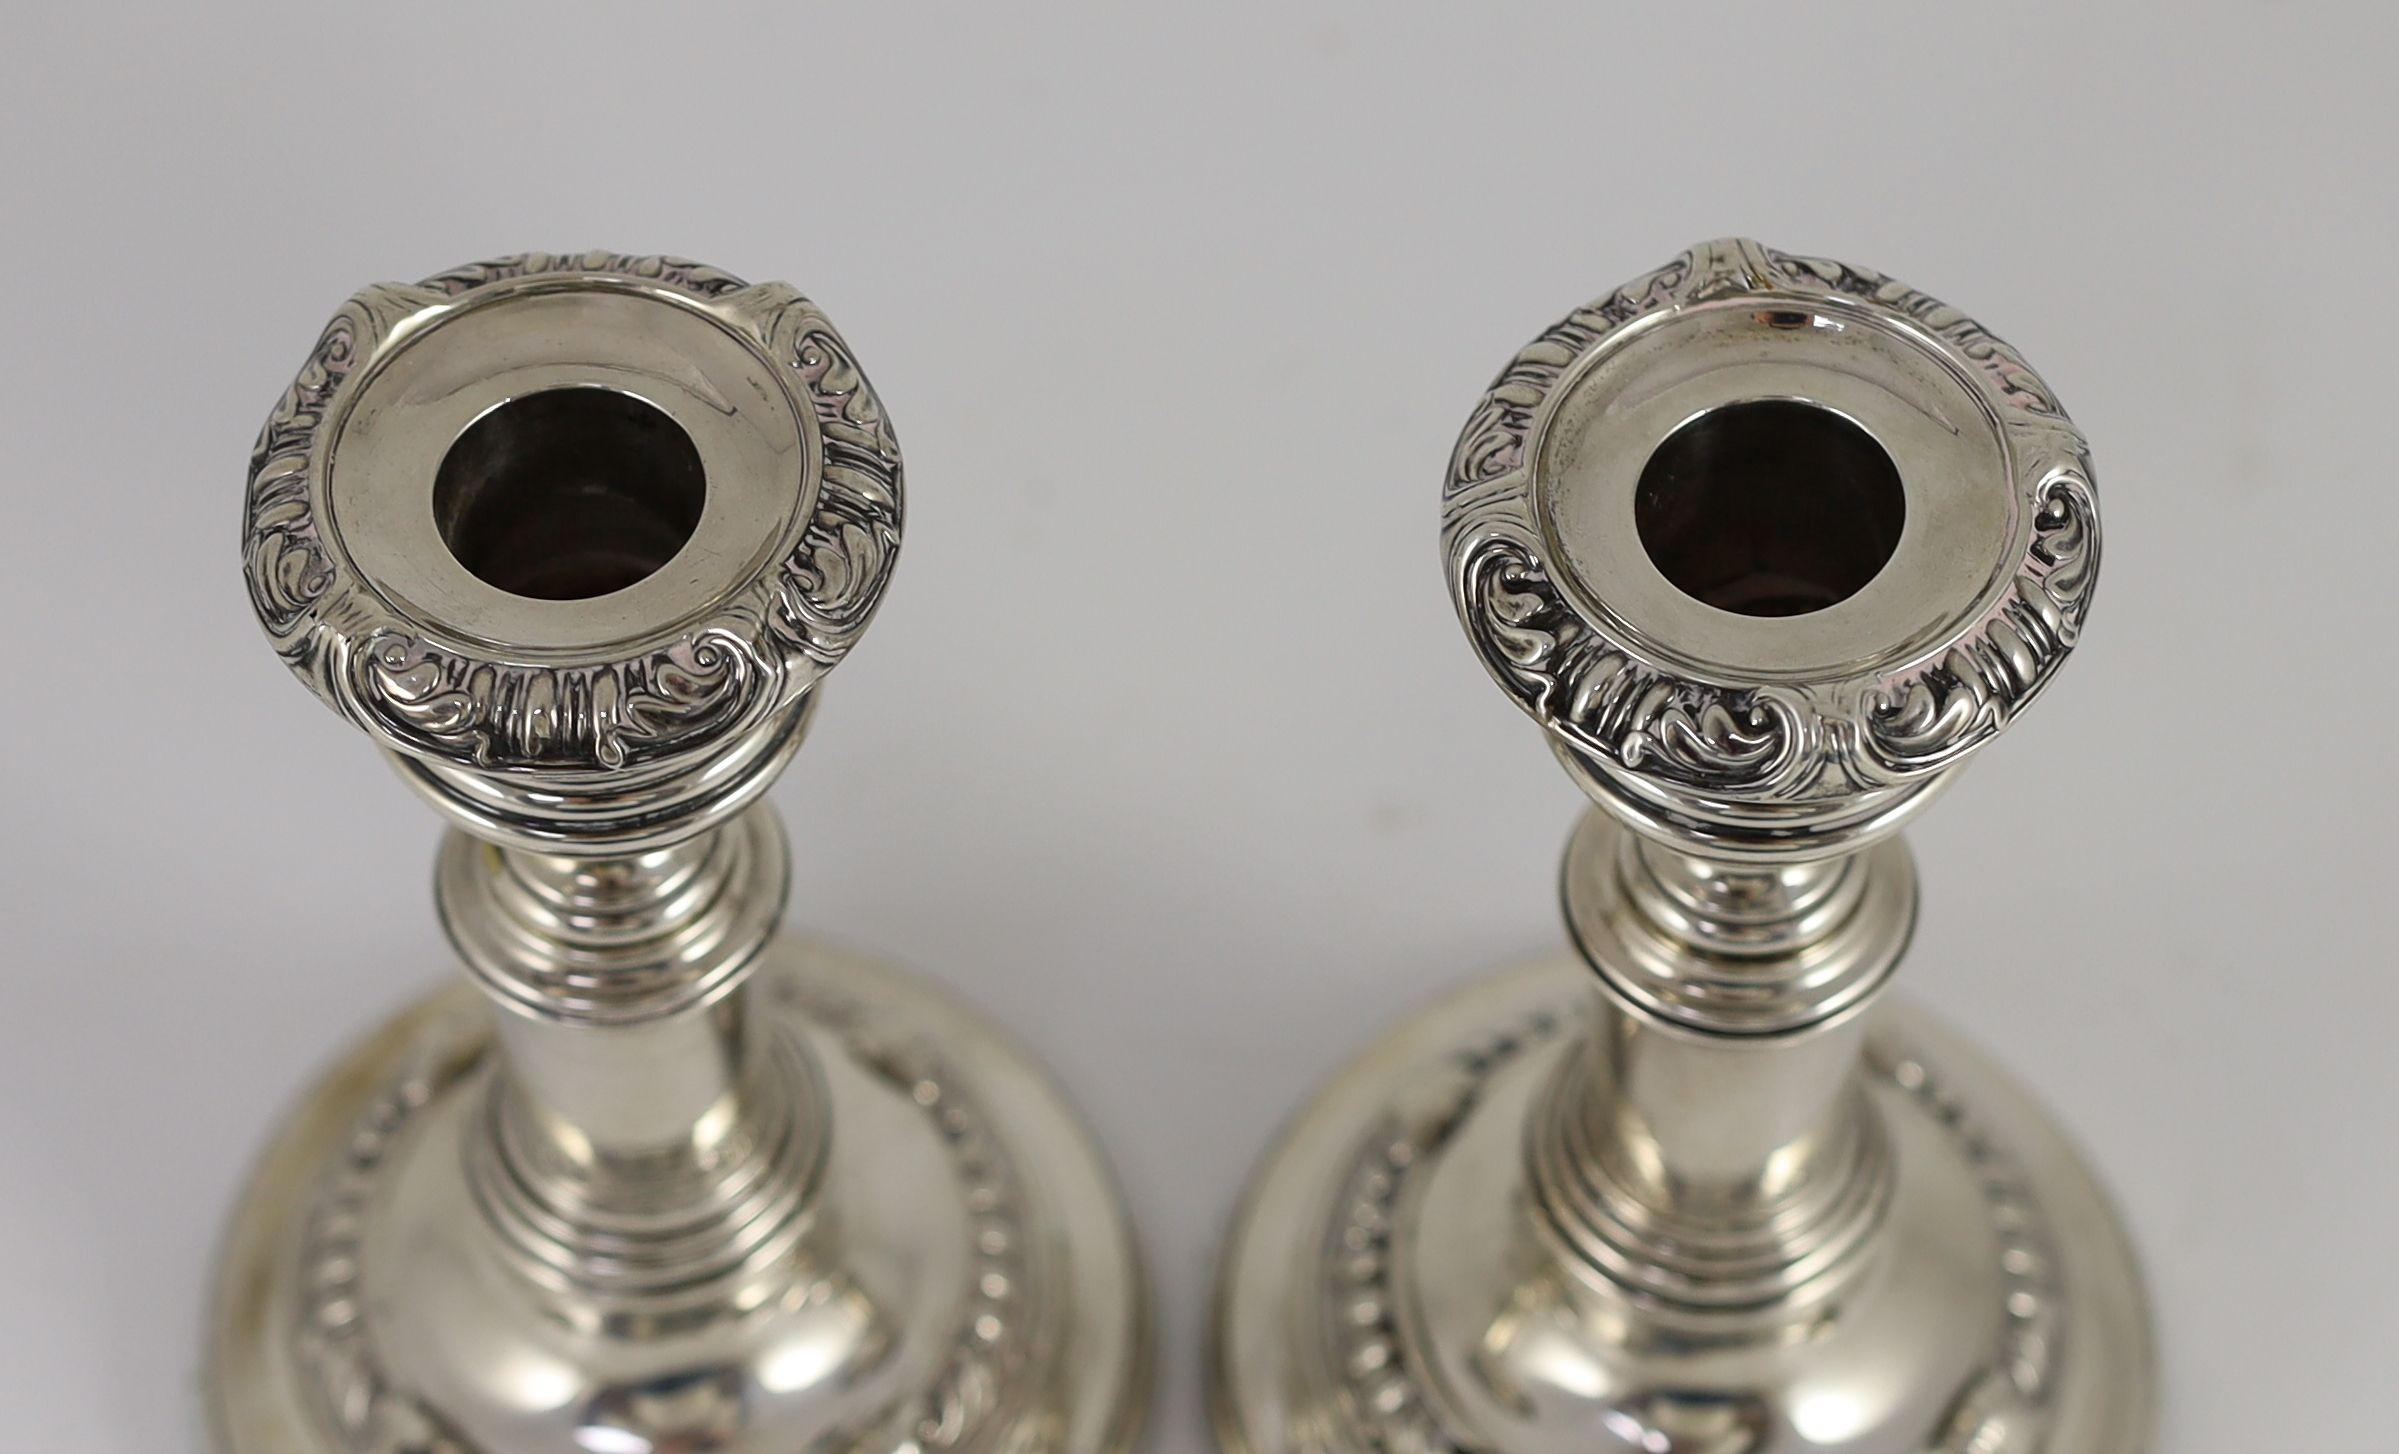 A pair of George III silver telescopic candlesticks, by S.C. Younge & Co